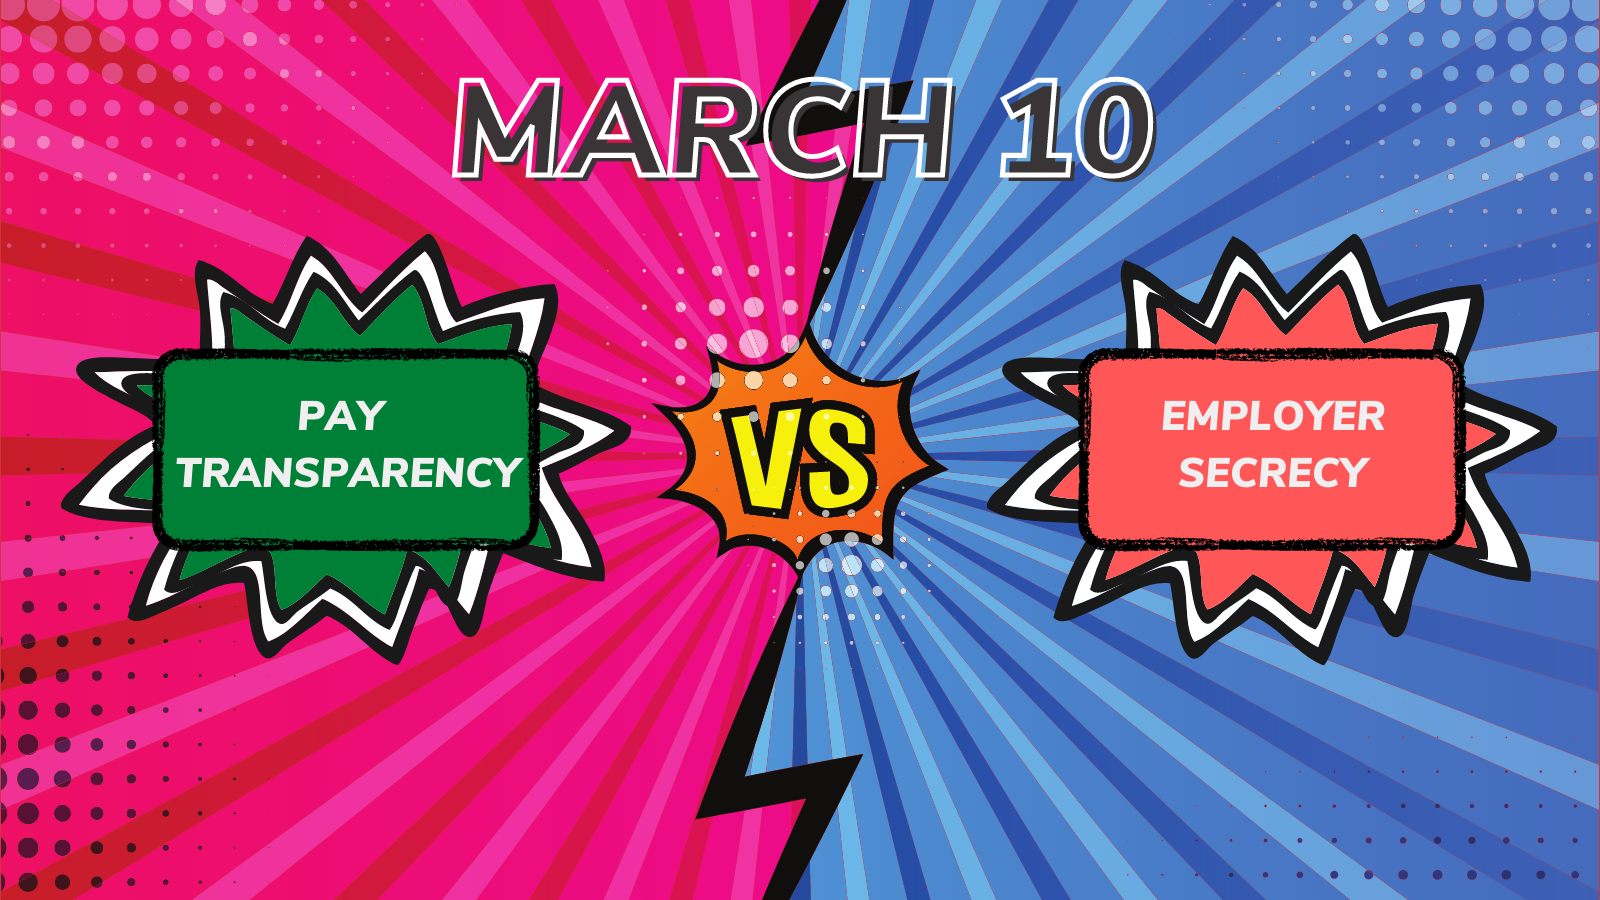 March 10: Pay Transparency vs. Employer Secrecy